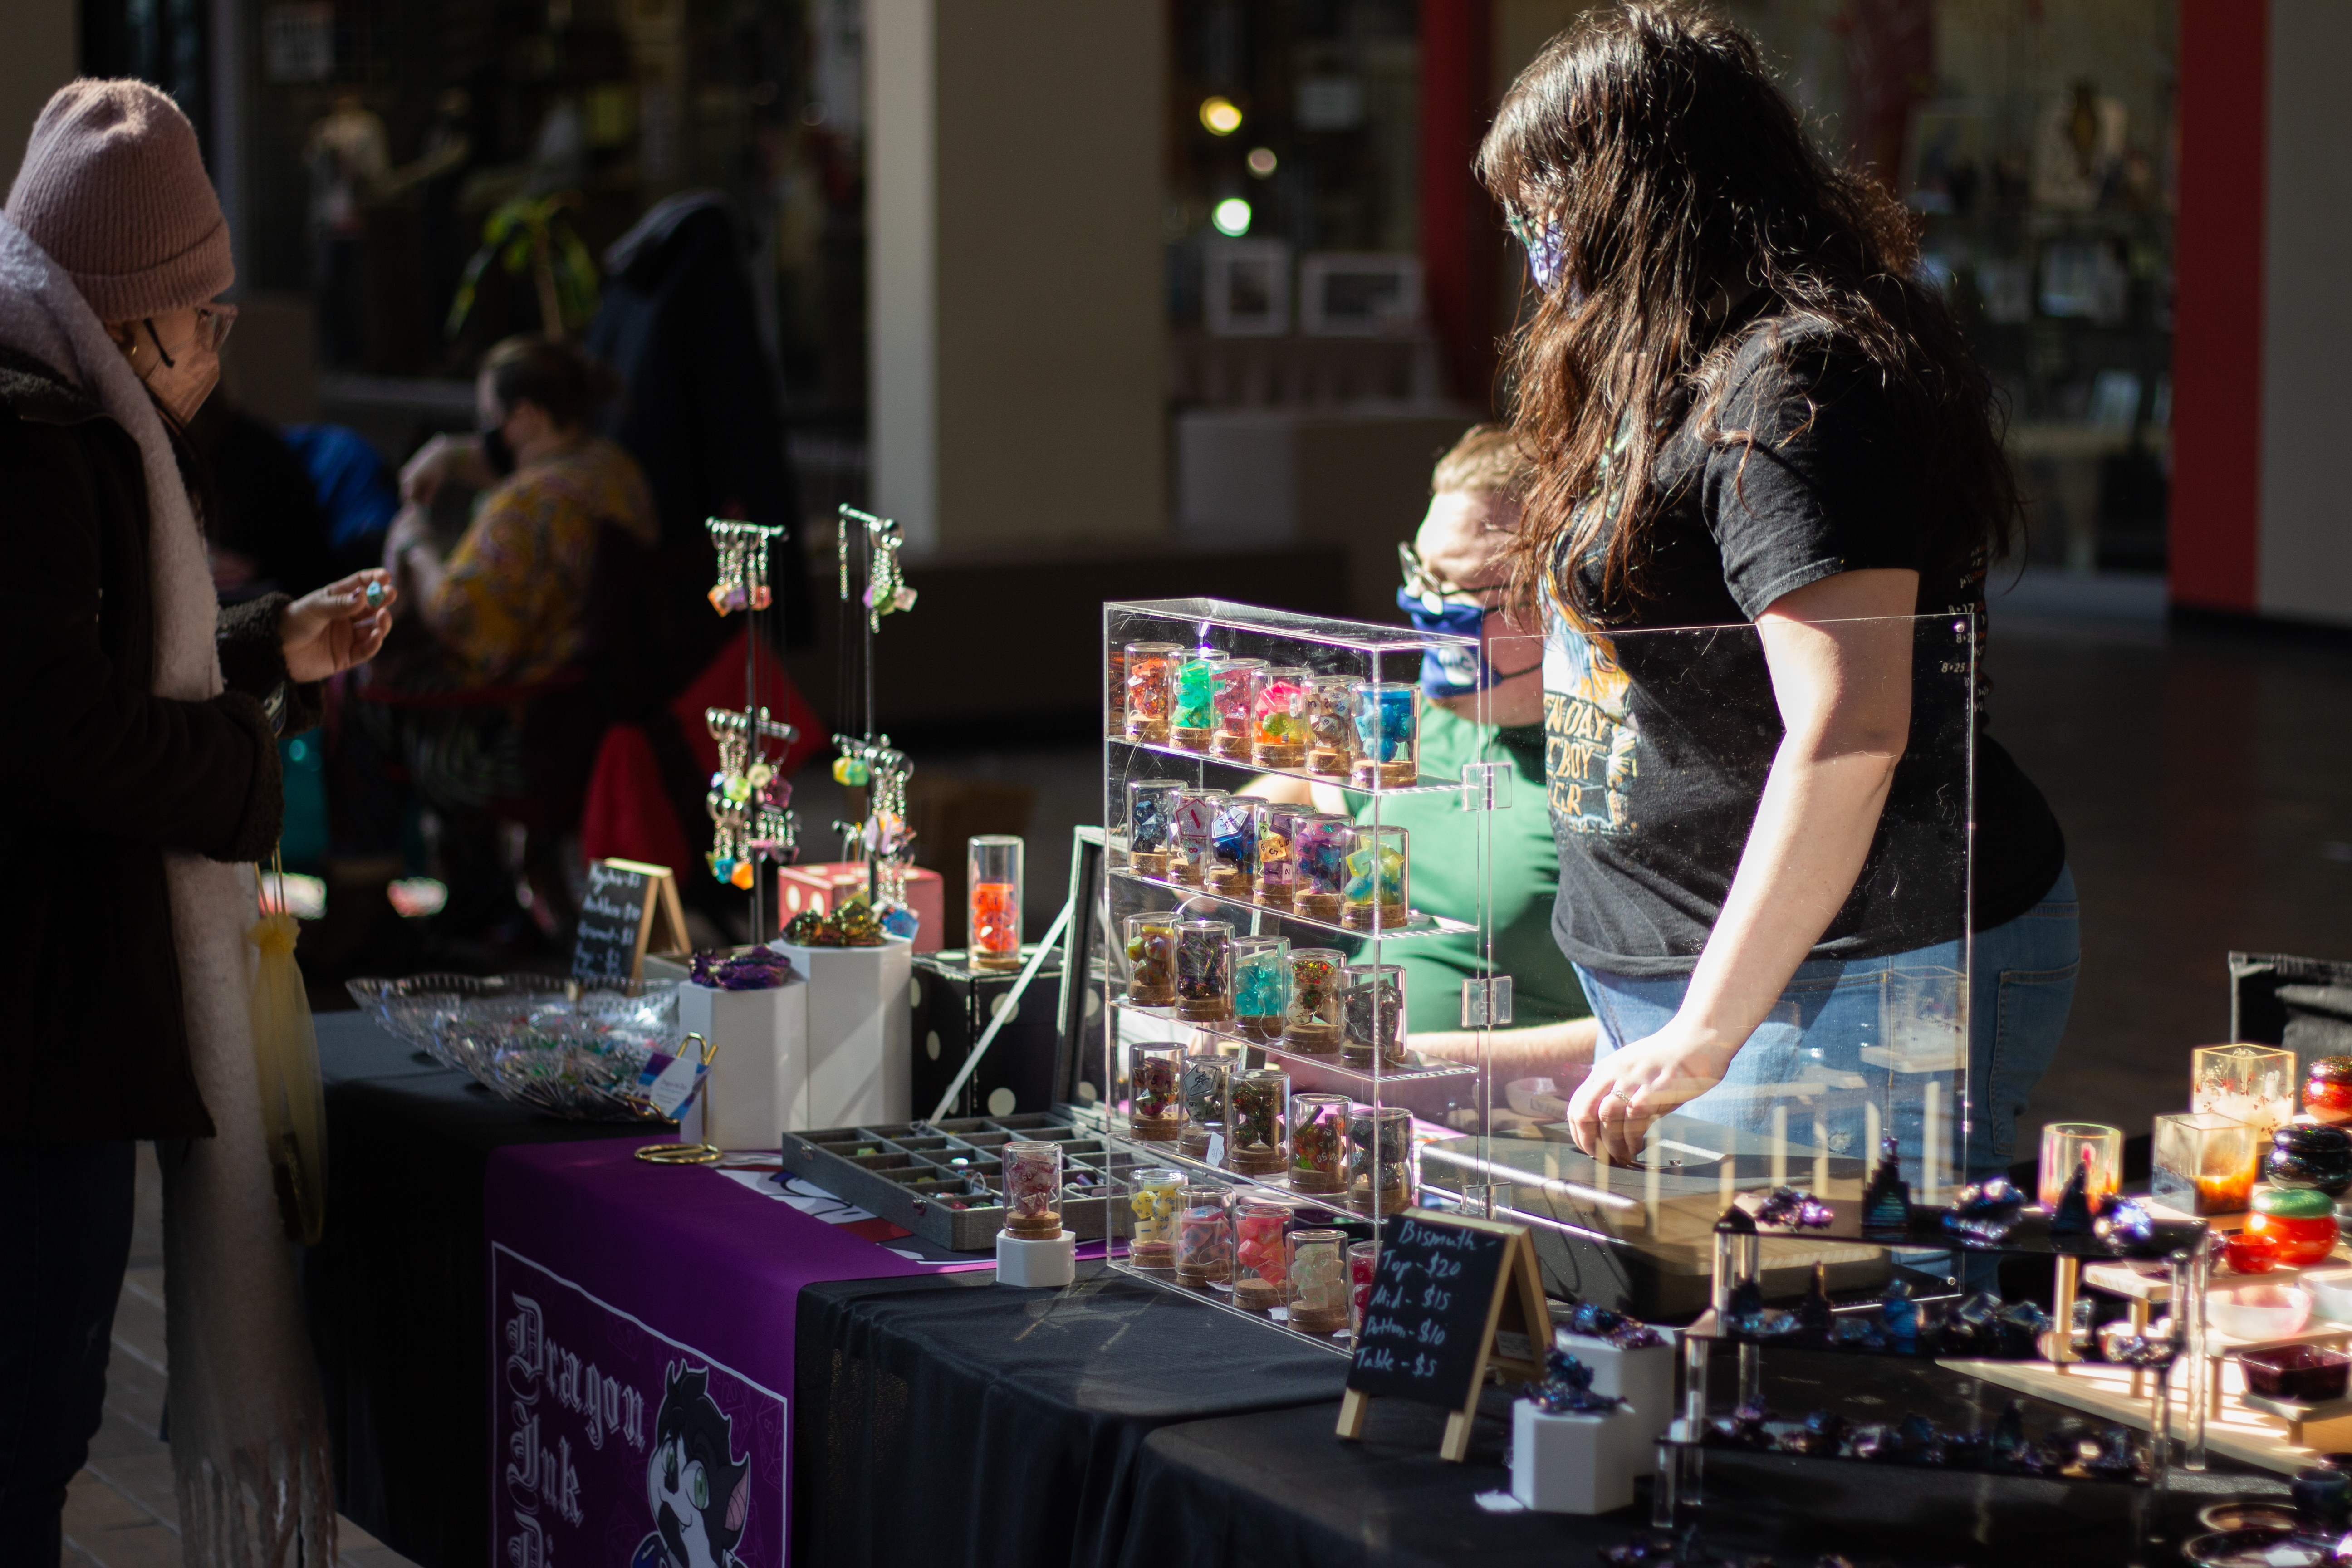 A view of Dragon Ink Diceâ€™s vendor table at the CU Winter Farmers Market located in  Lincoln Square Mall. On the table is an assortment of artisan dice, earrings, dishes and ashtrays of various styles and colors. The table itself is covered in black while the sign for Dragon Ink Dice is purple. The vendor is helping out an interested shopper as they look at one of the dice. Photo by Jorge Murga.